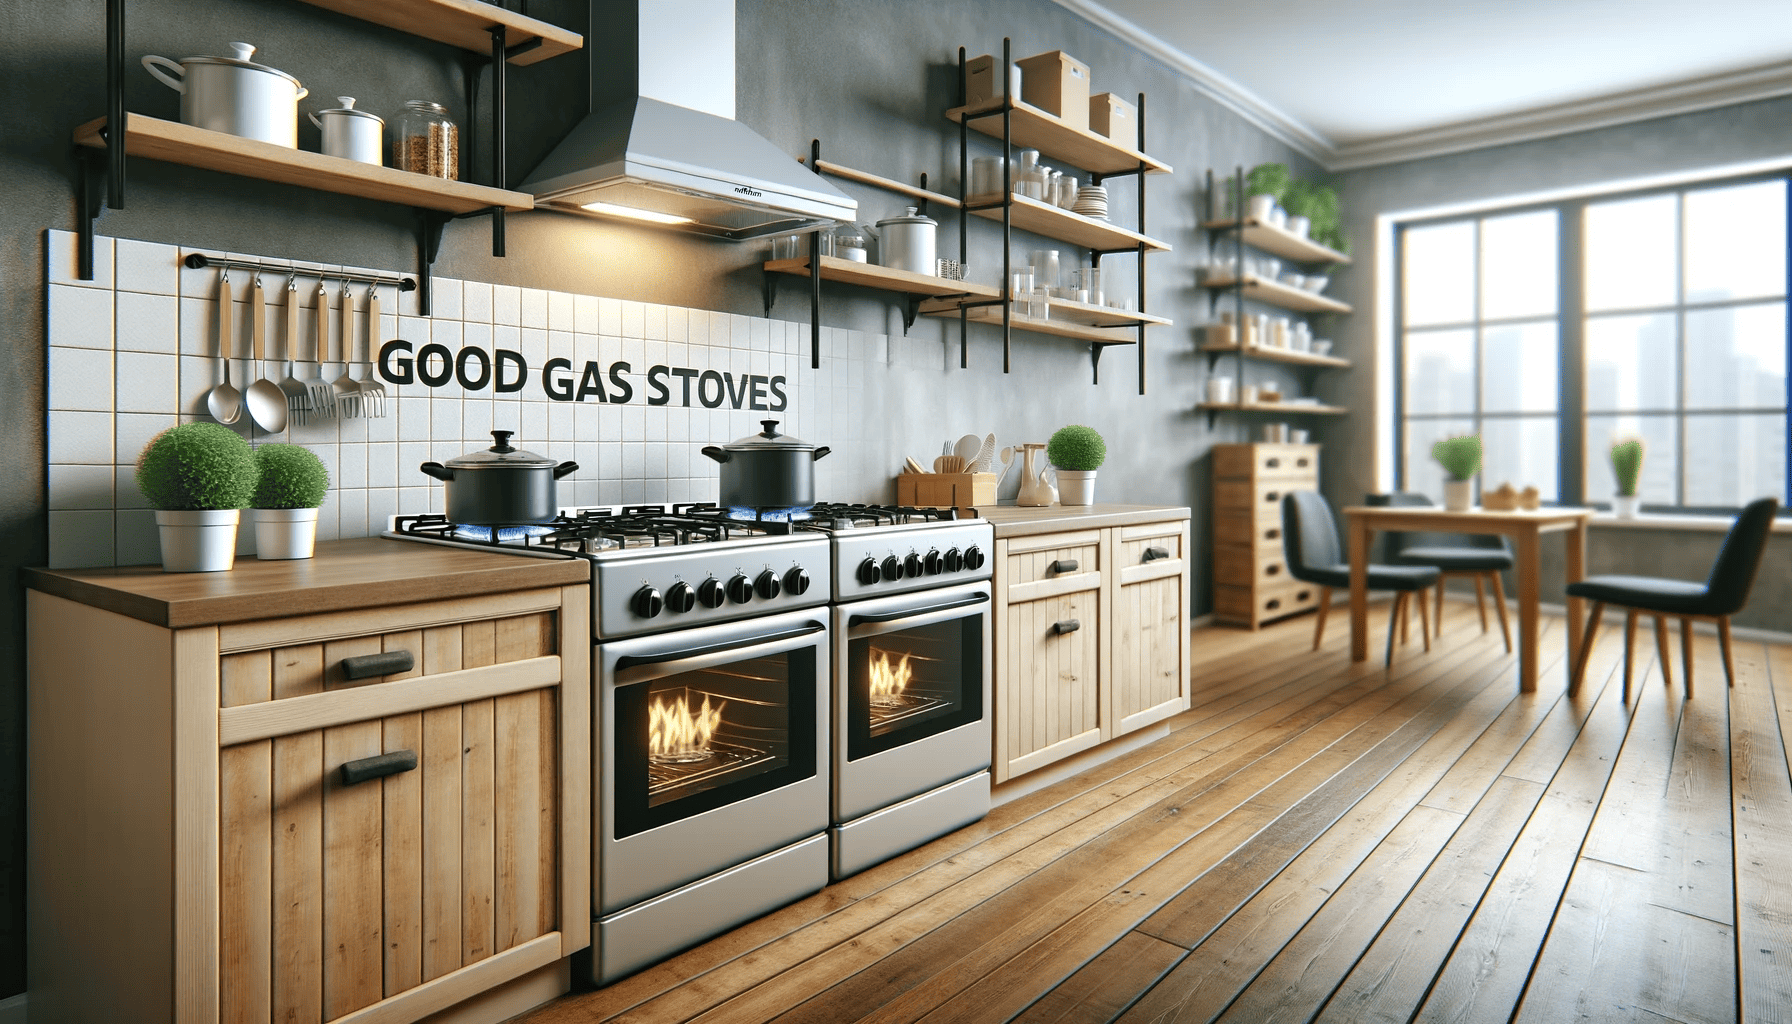 Good Gas Stoves for Rental Property